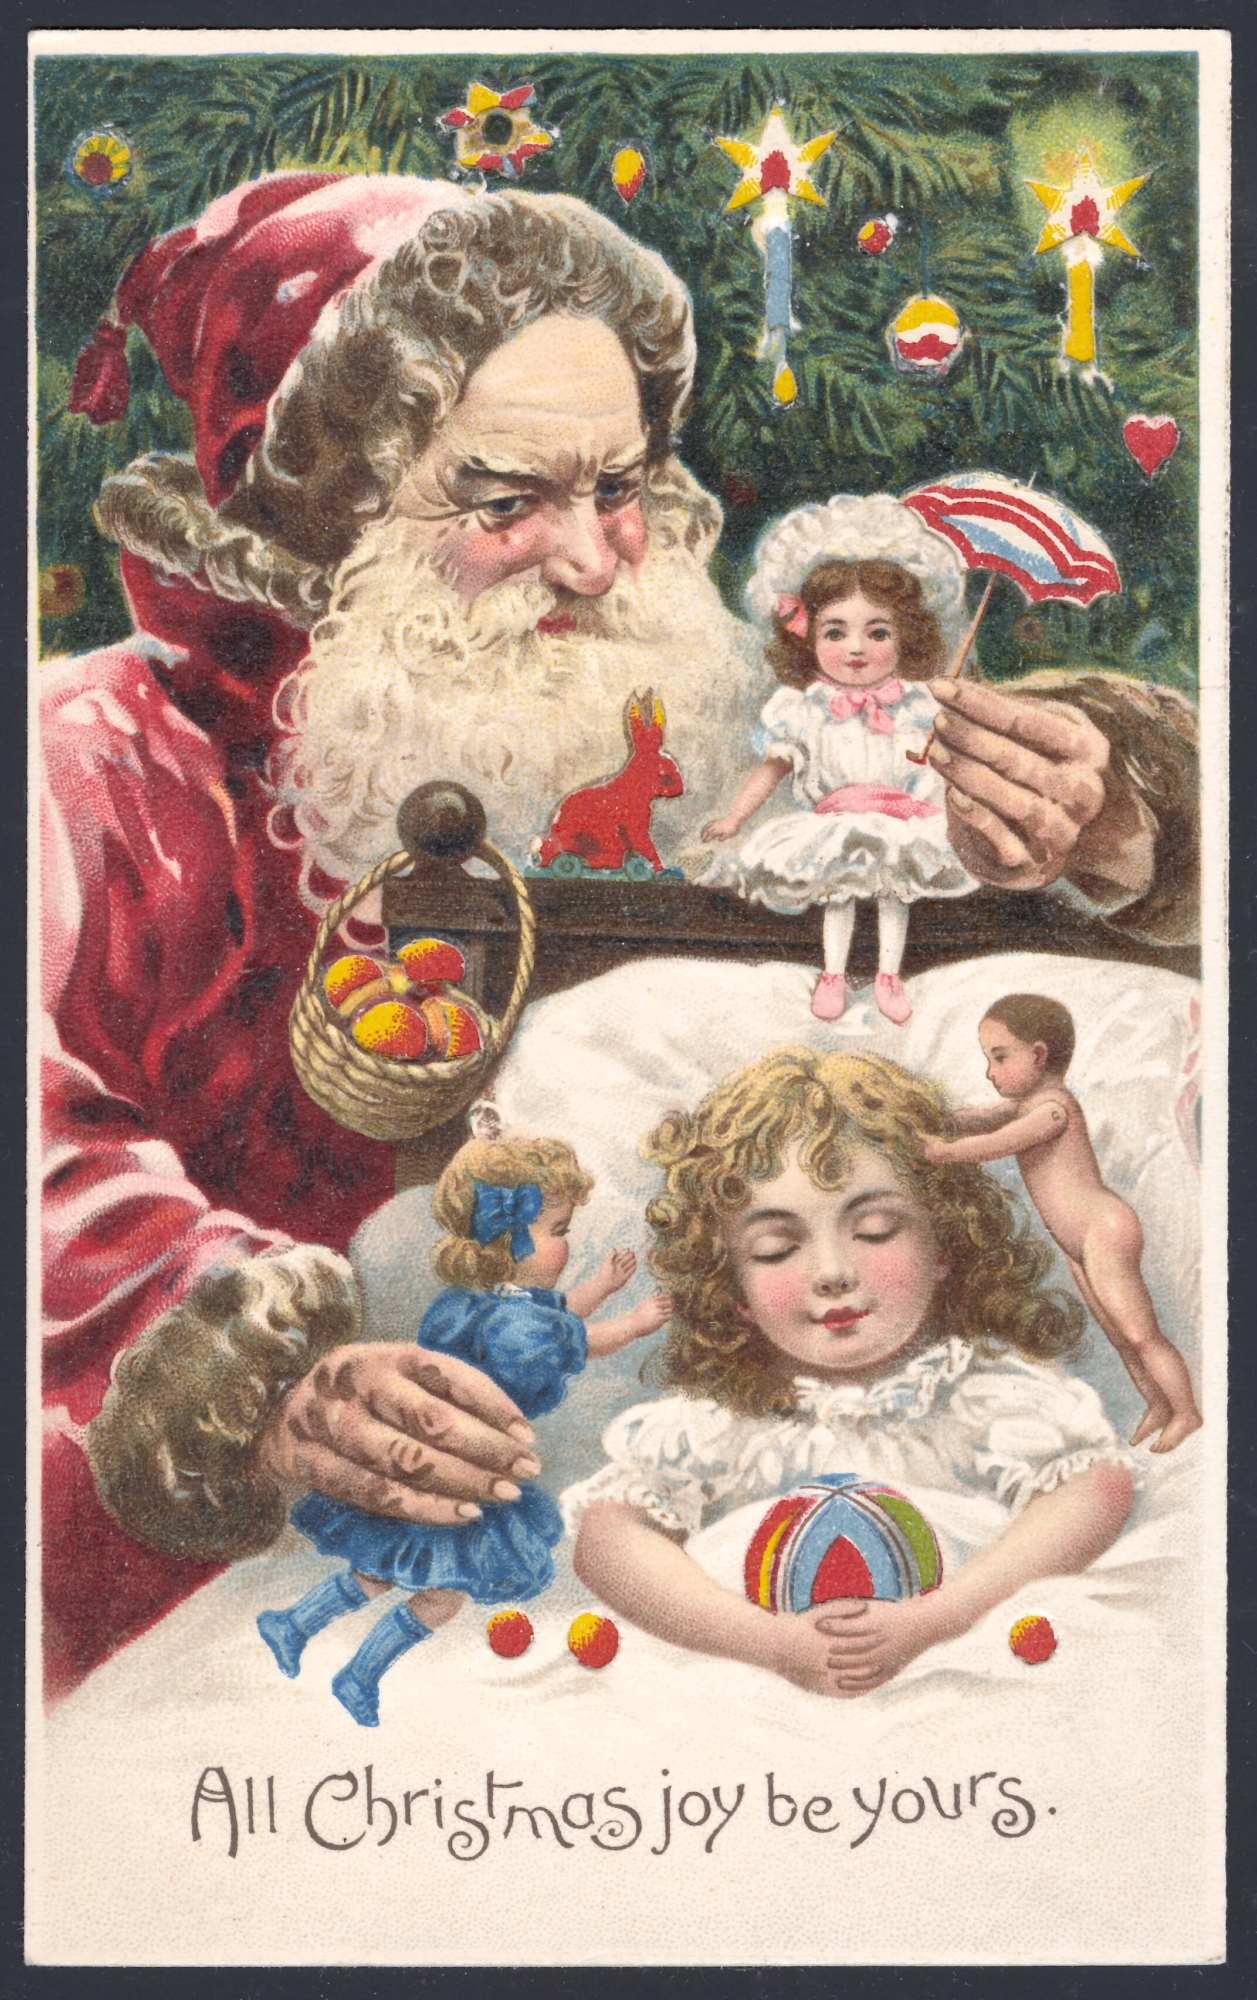 Santa wearing a red robe. Lithographed in Germany (die-cut hold-to-light)